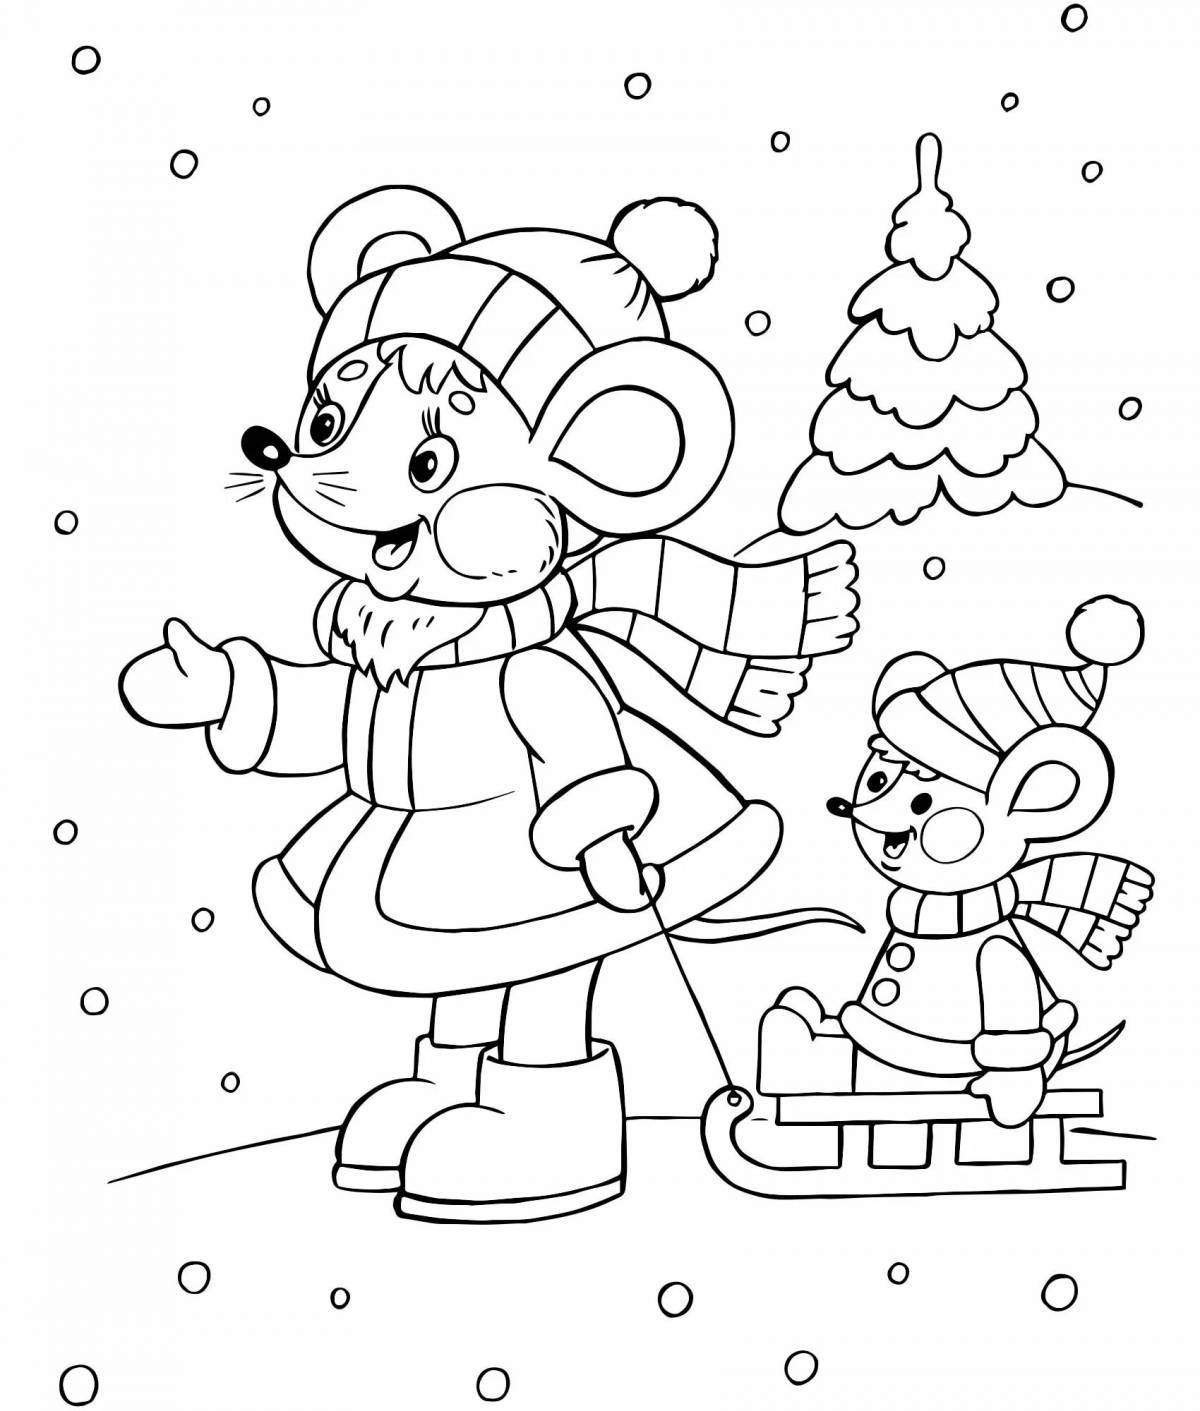 Merry winter coloring book for children 3-4 years old